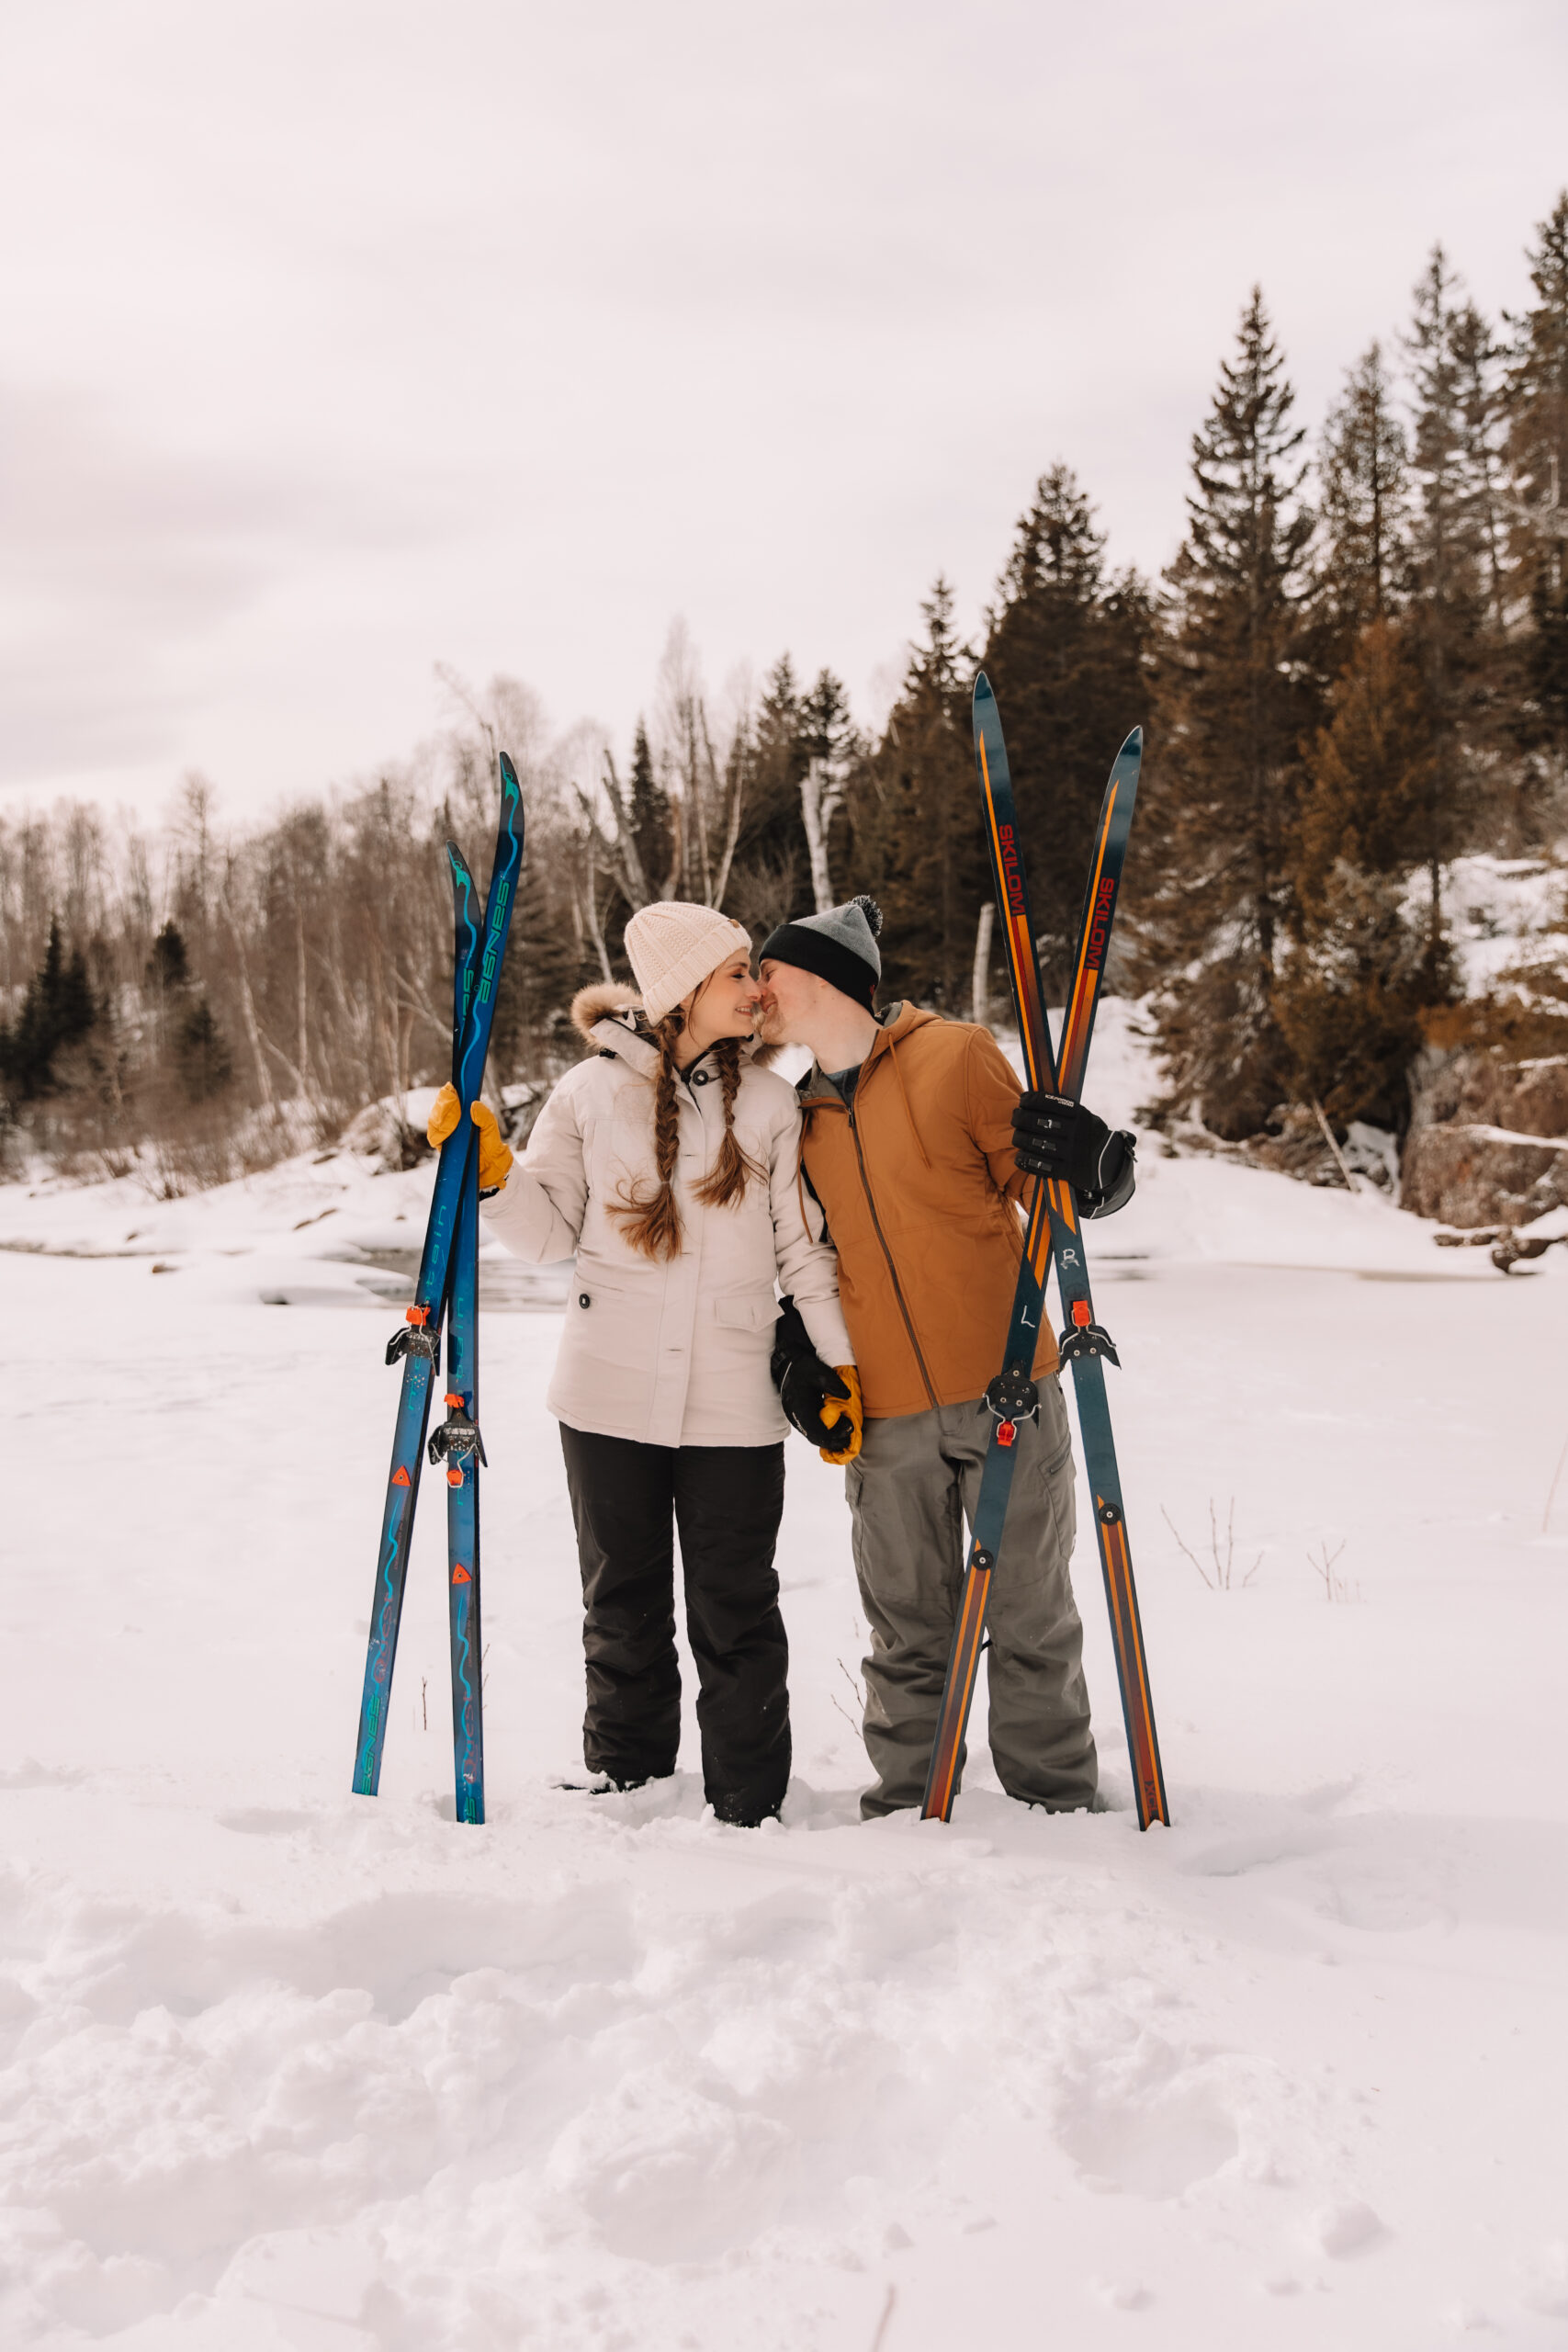 A couple dressed up in warm winter attire as they stand next to each other in the snow with their skis next to them planted in the snow